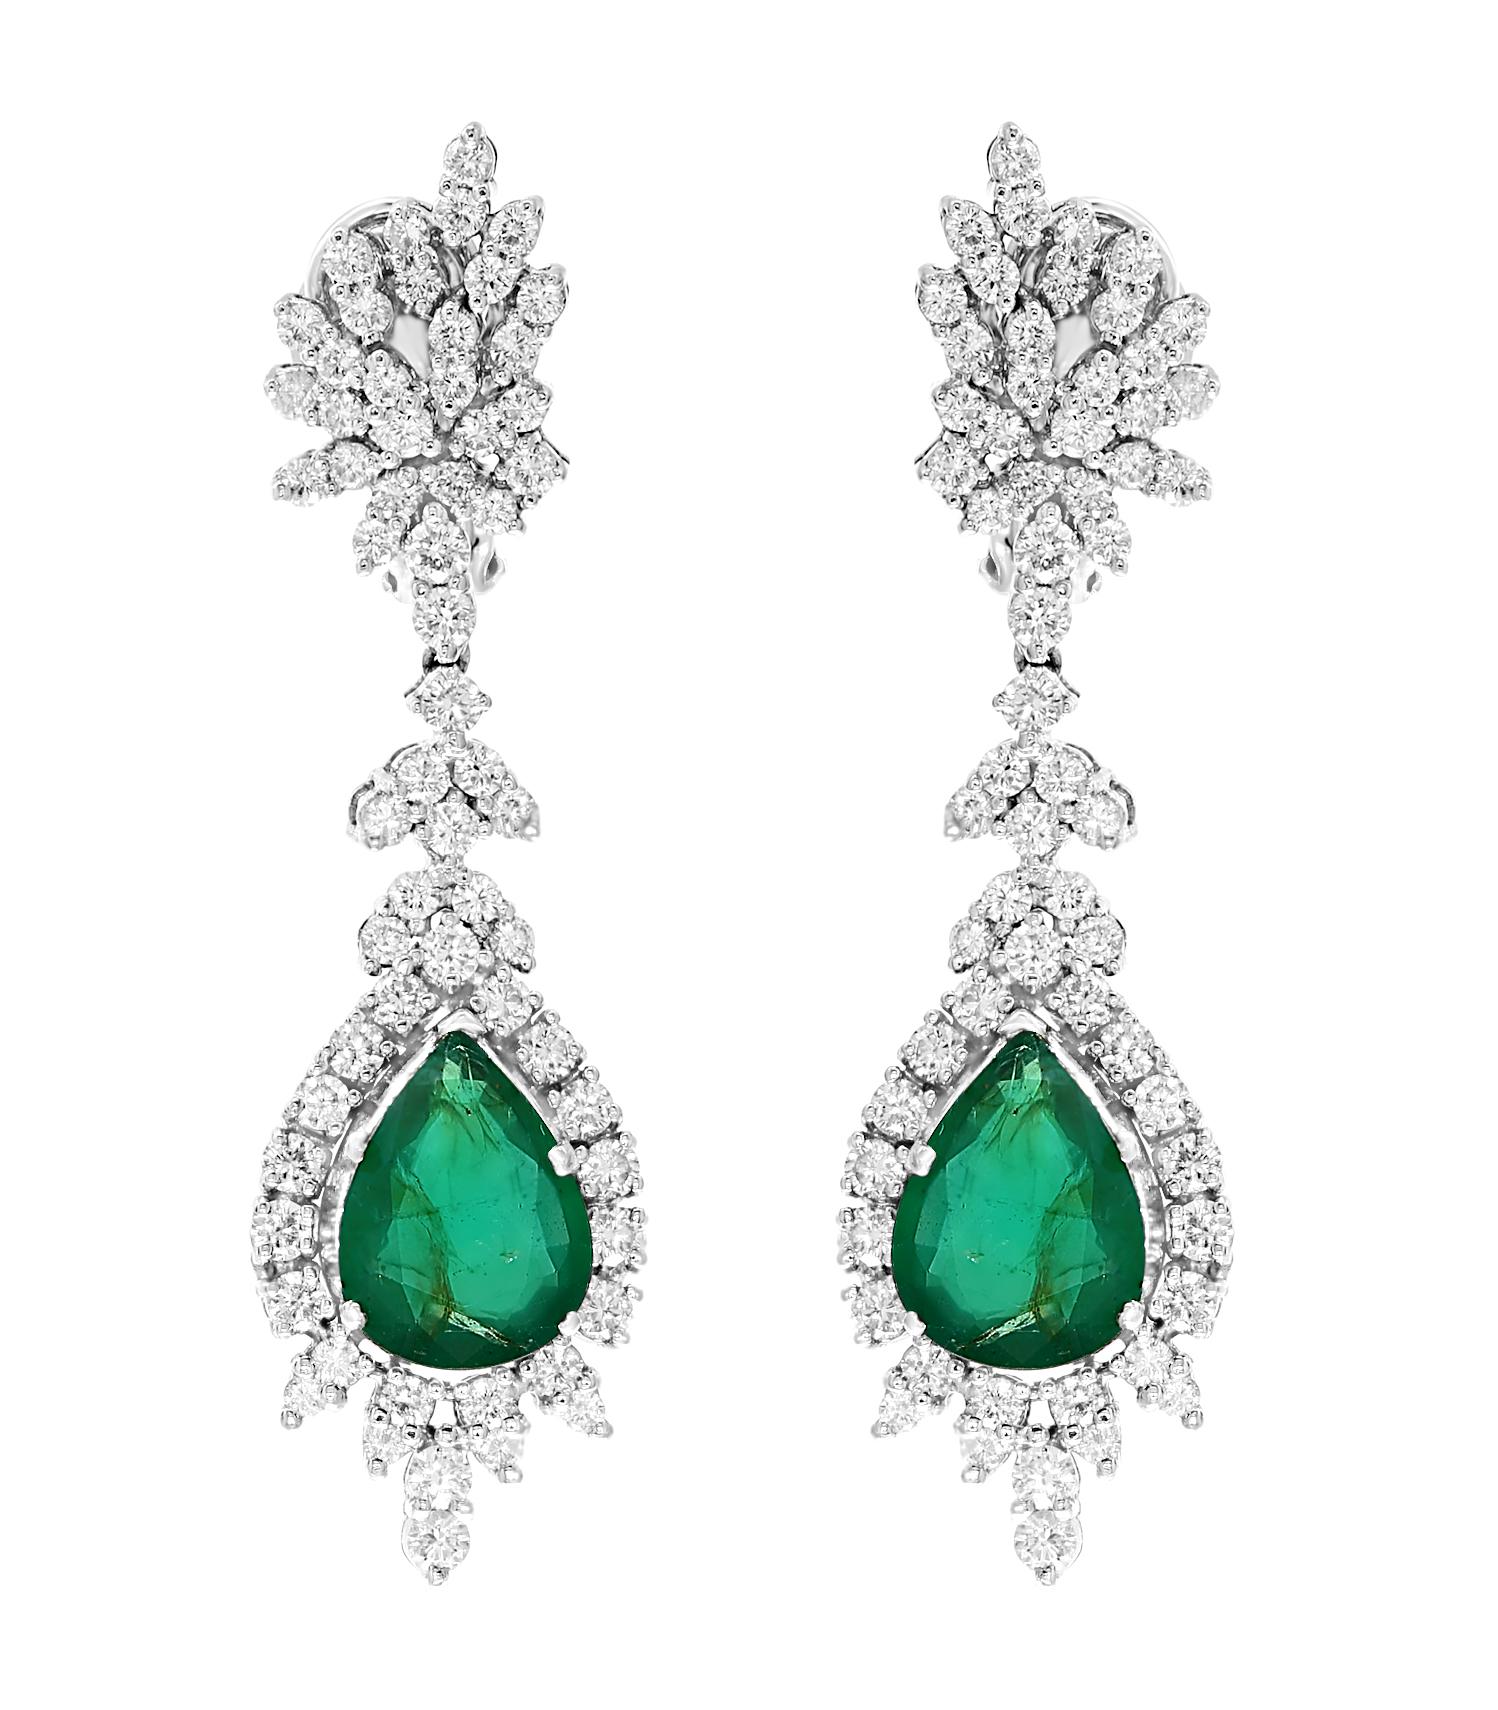  GIA Certified Pear Shape  Emerald And Diamond  Necklace And Earring  Bridal Suite Estate
This spectacular Bridal set  consisting of one large 8.6 Carat Pear shape  Emerald  in the center measuring 18.5 X 13.2 X 6.45 surrounded by brilliant cut